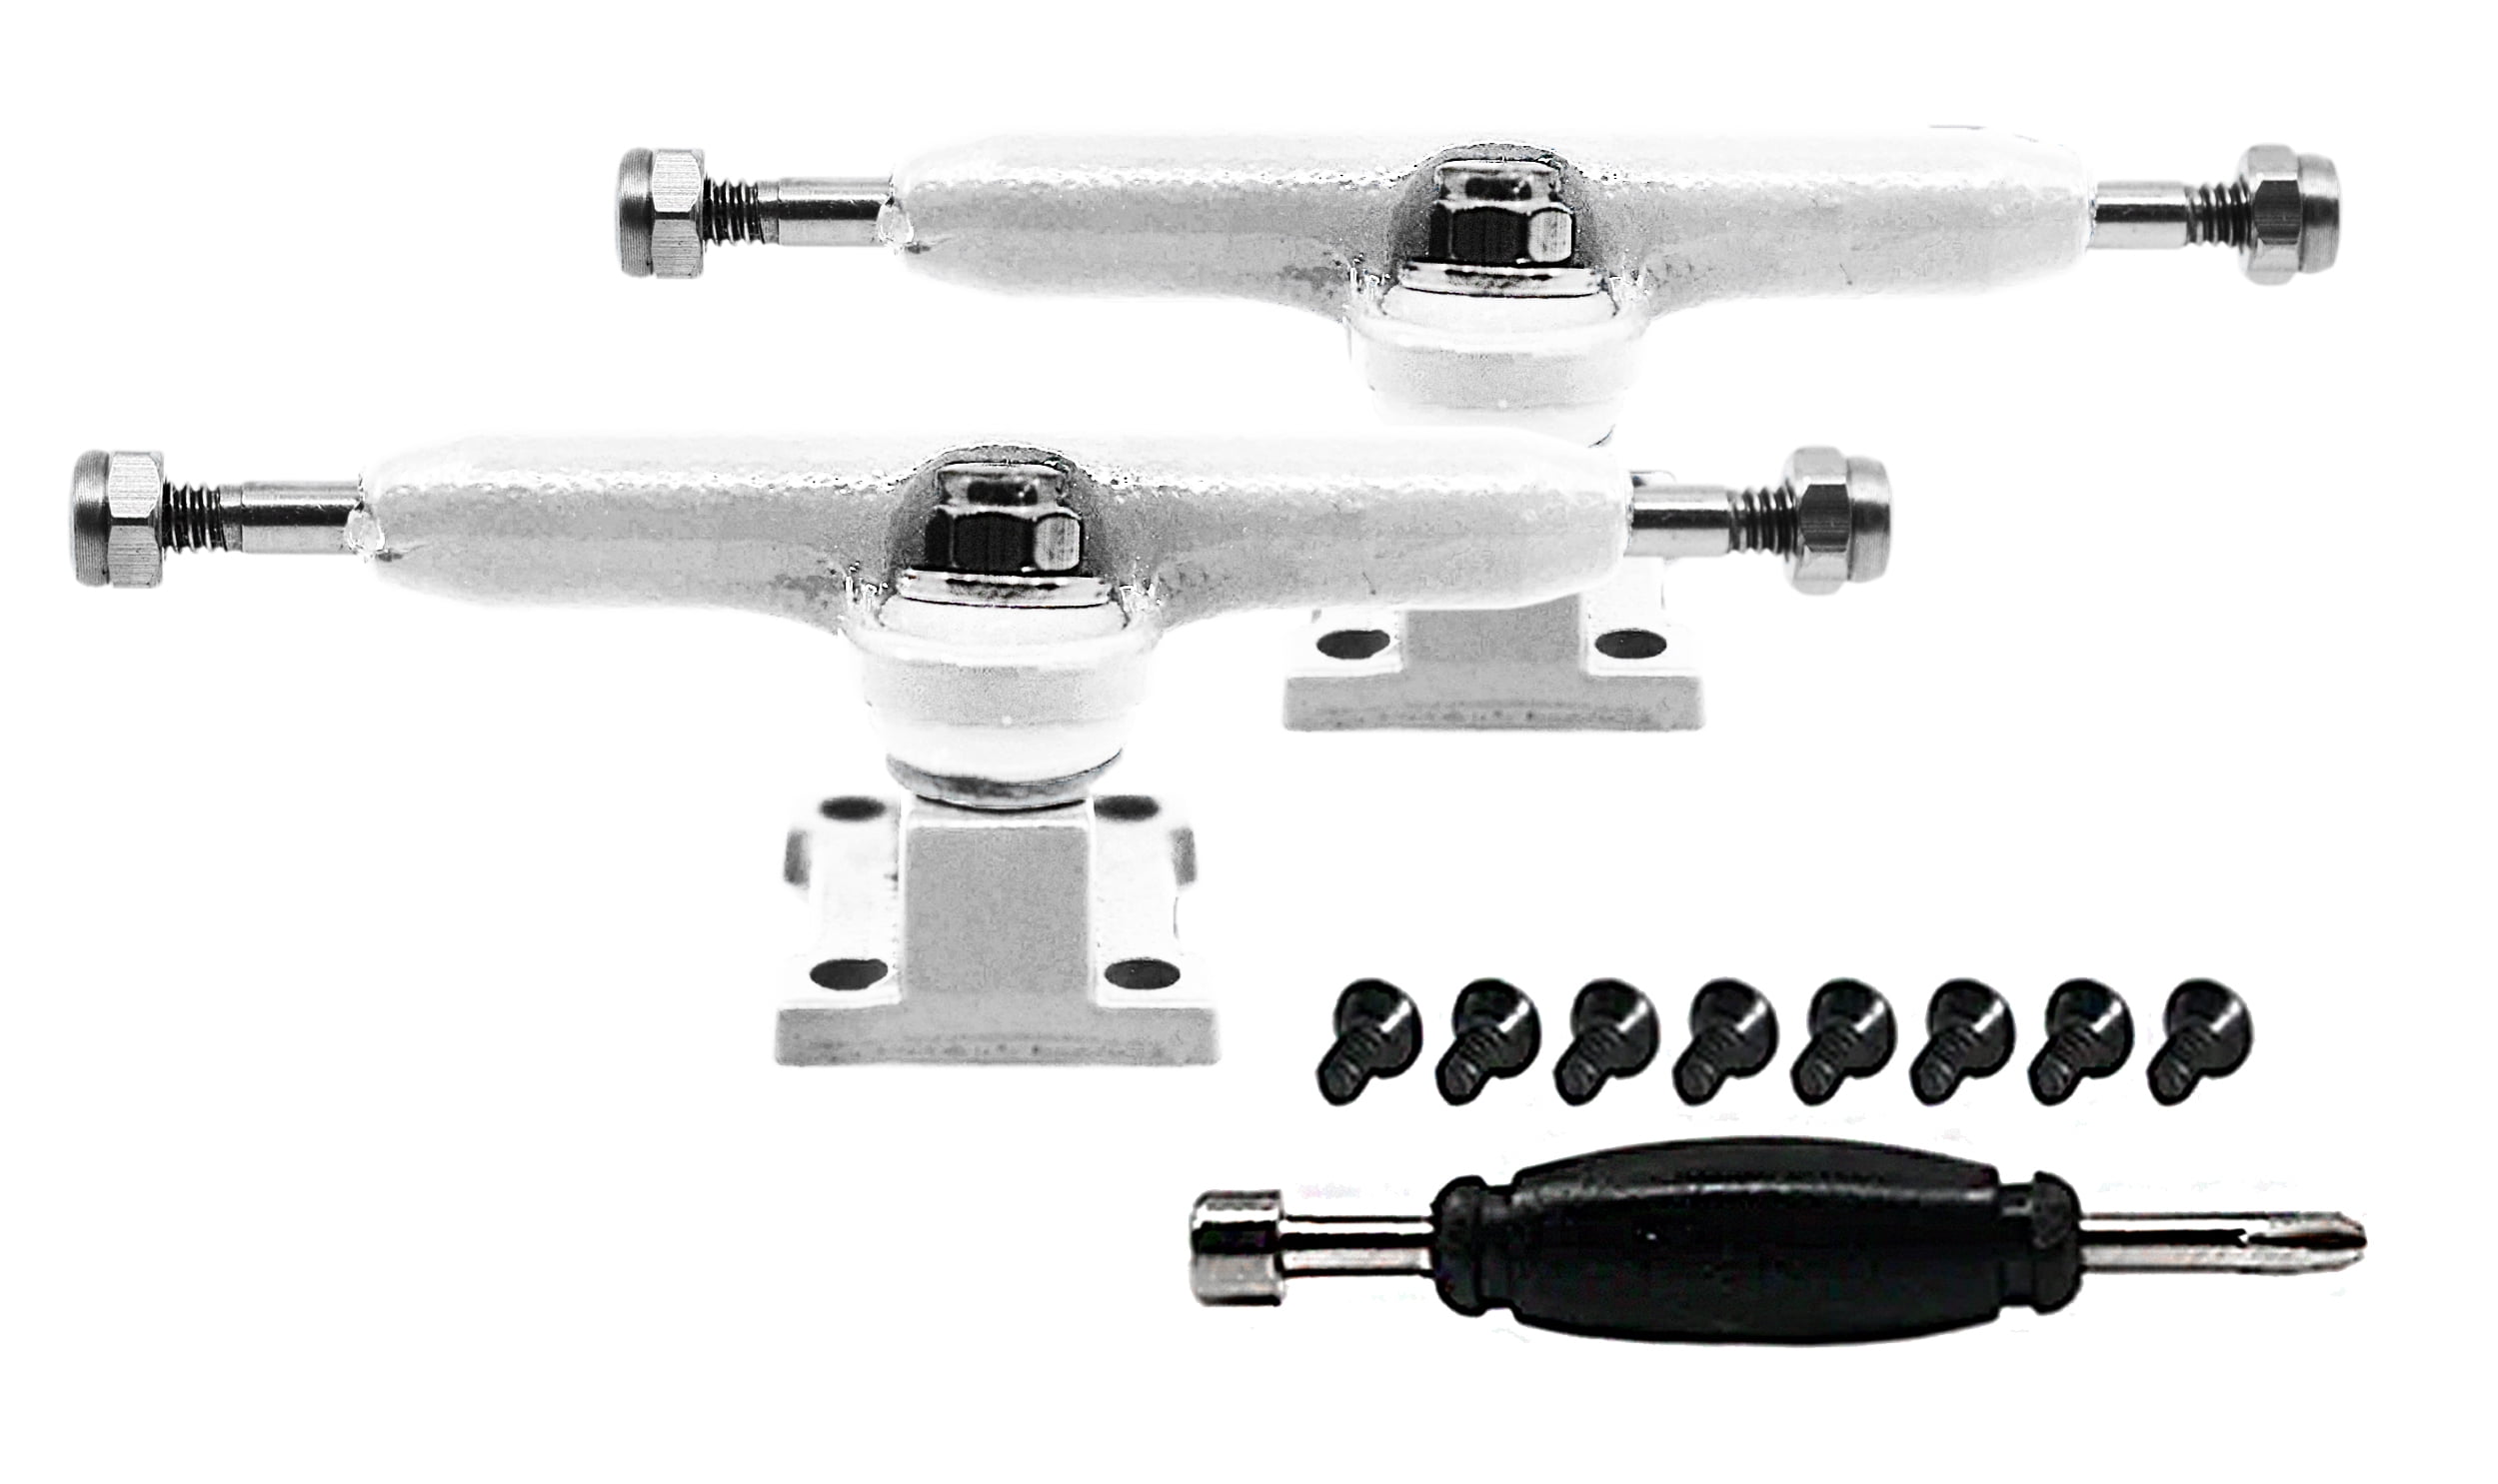 Teak Tuning Prodigy Fingerboard Trucks with Upgraded Lock Nuts Midnight Black Colorway Includes Standard Tuning Appearance /& Components Professional Shape 32mm Wide